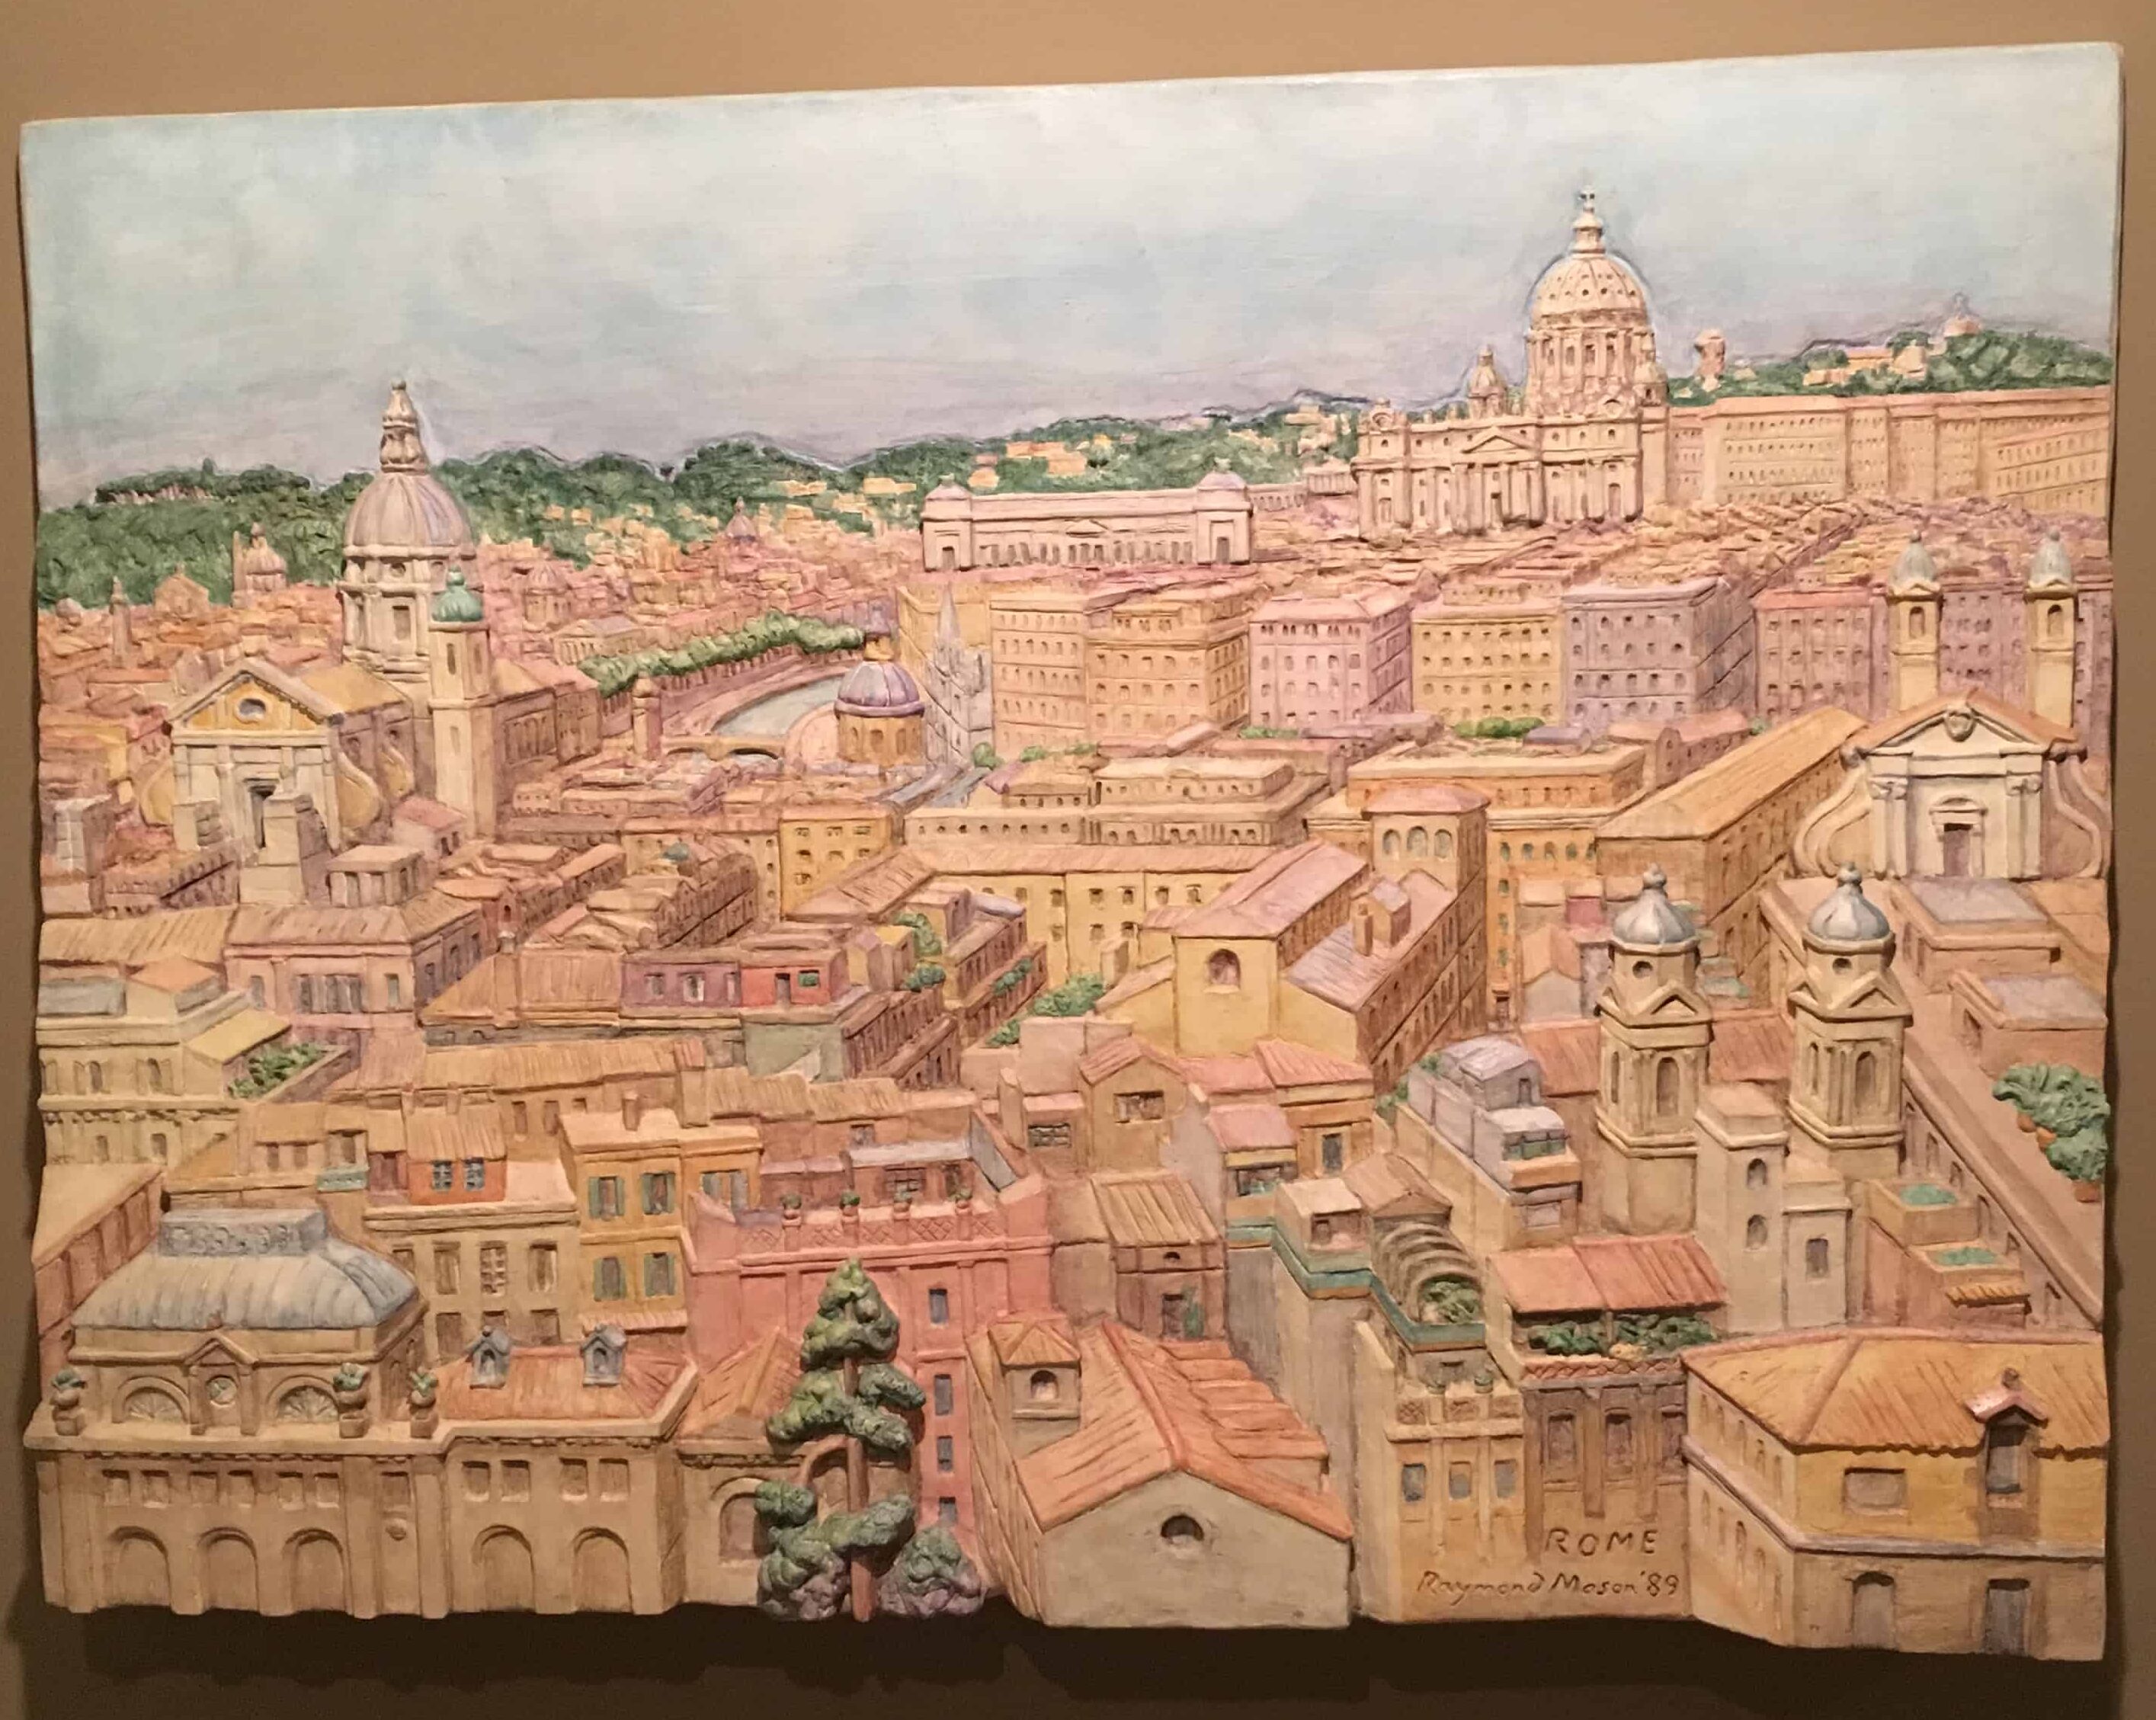 Rome, by Raymond Mason (England), 1989 at the Antioquia Museum in Medellín, Colombia